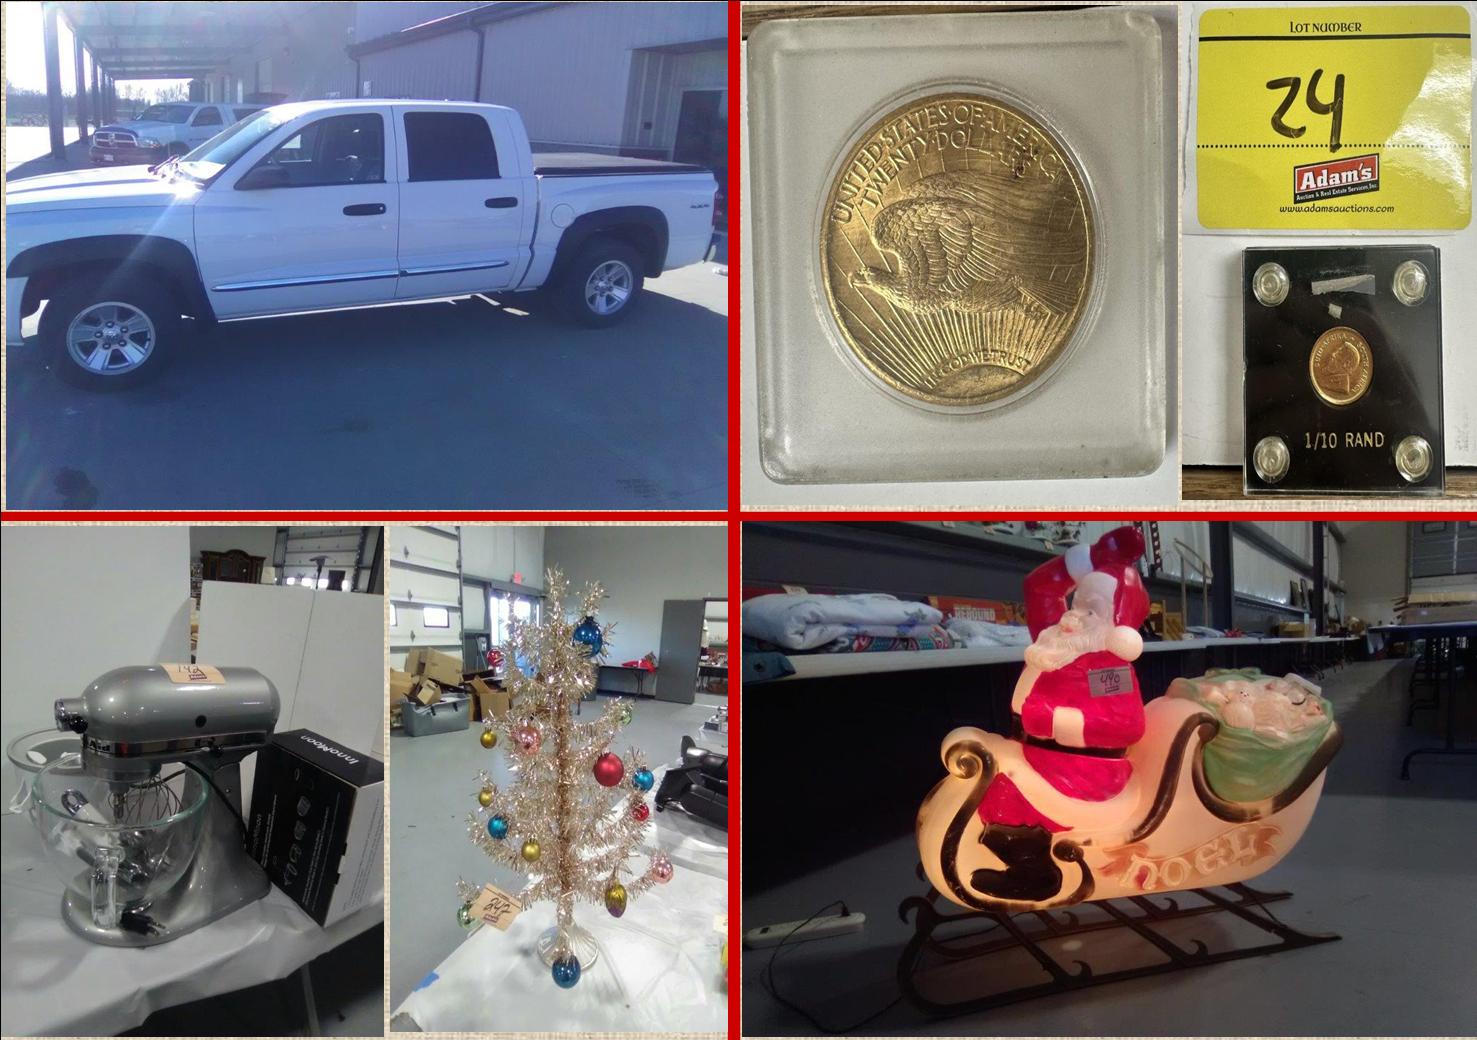 December 2nd Online Only Auction - Adam's Auction & Real Estate